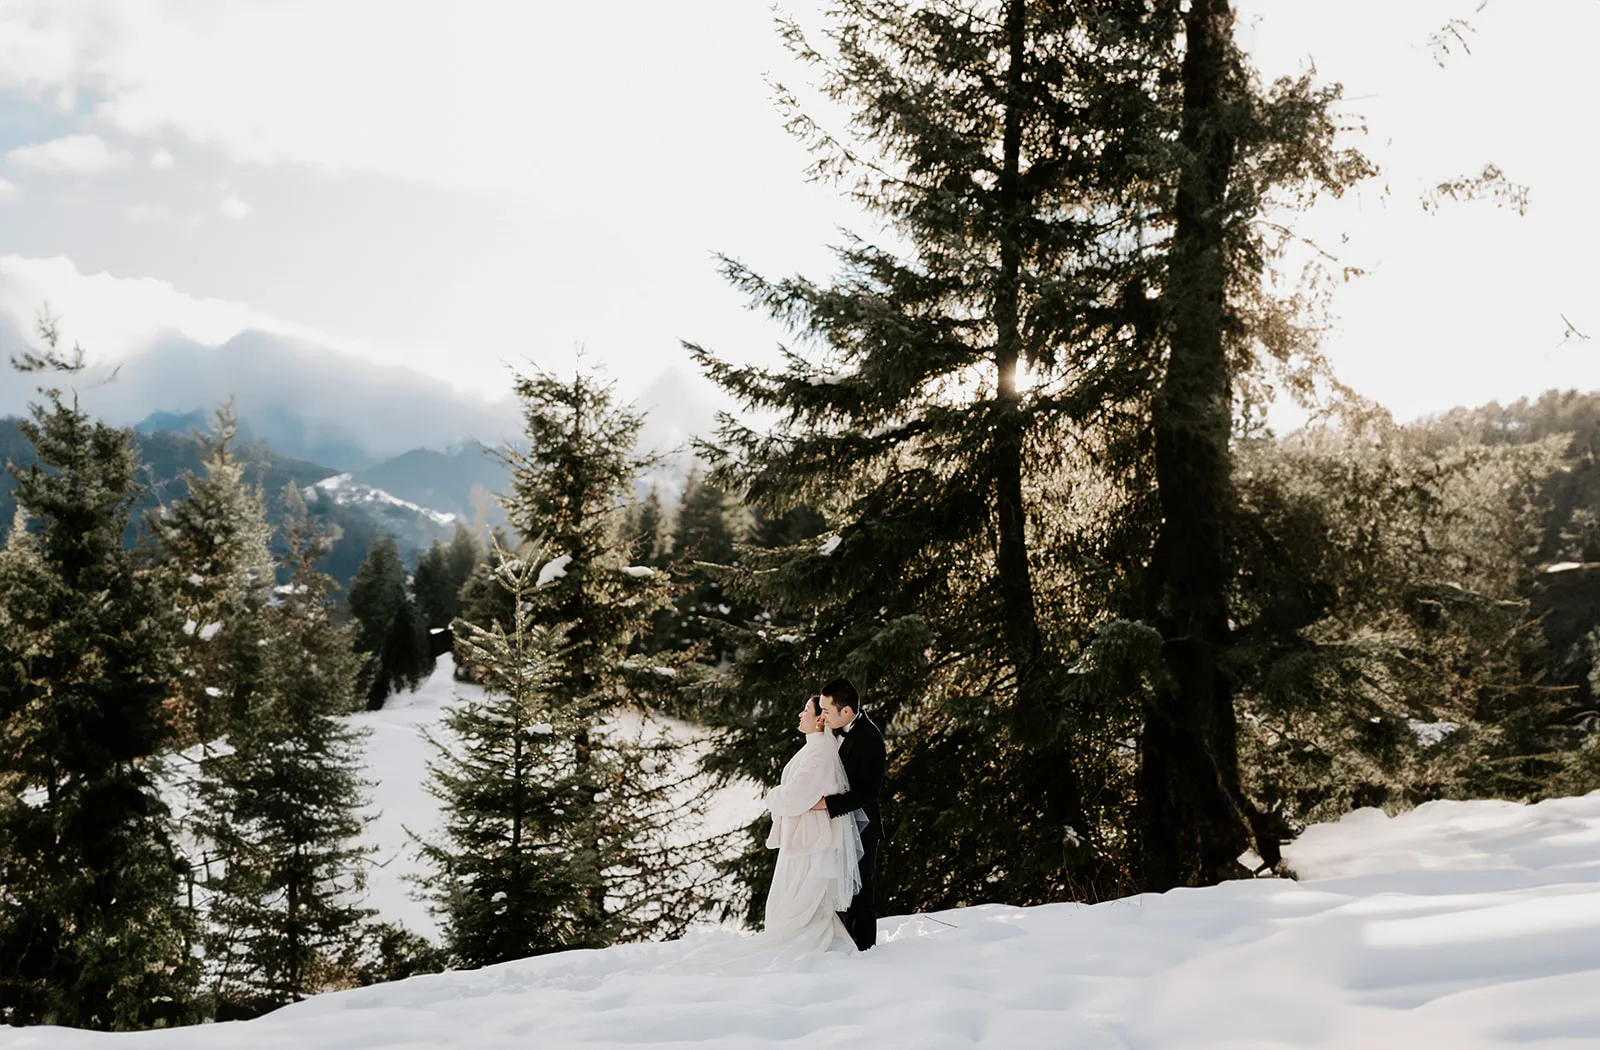 A couple shares an intimate cuddle in the snow-covered pine forest.